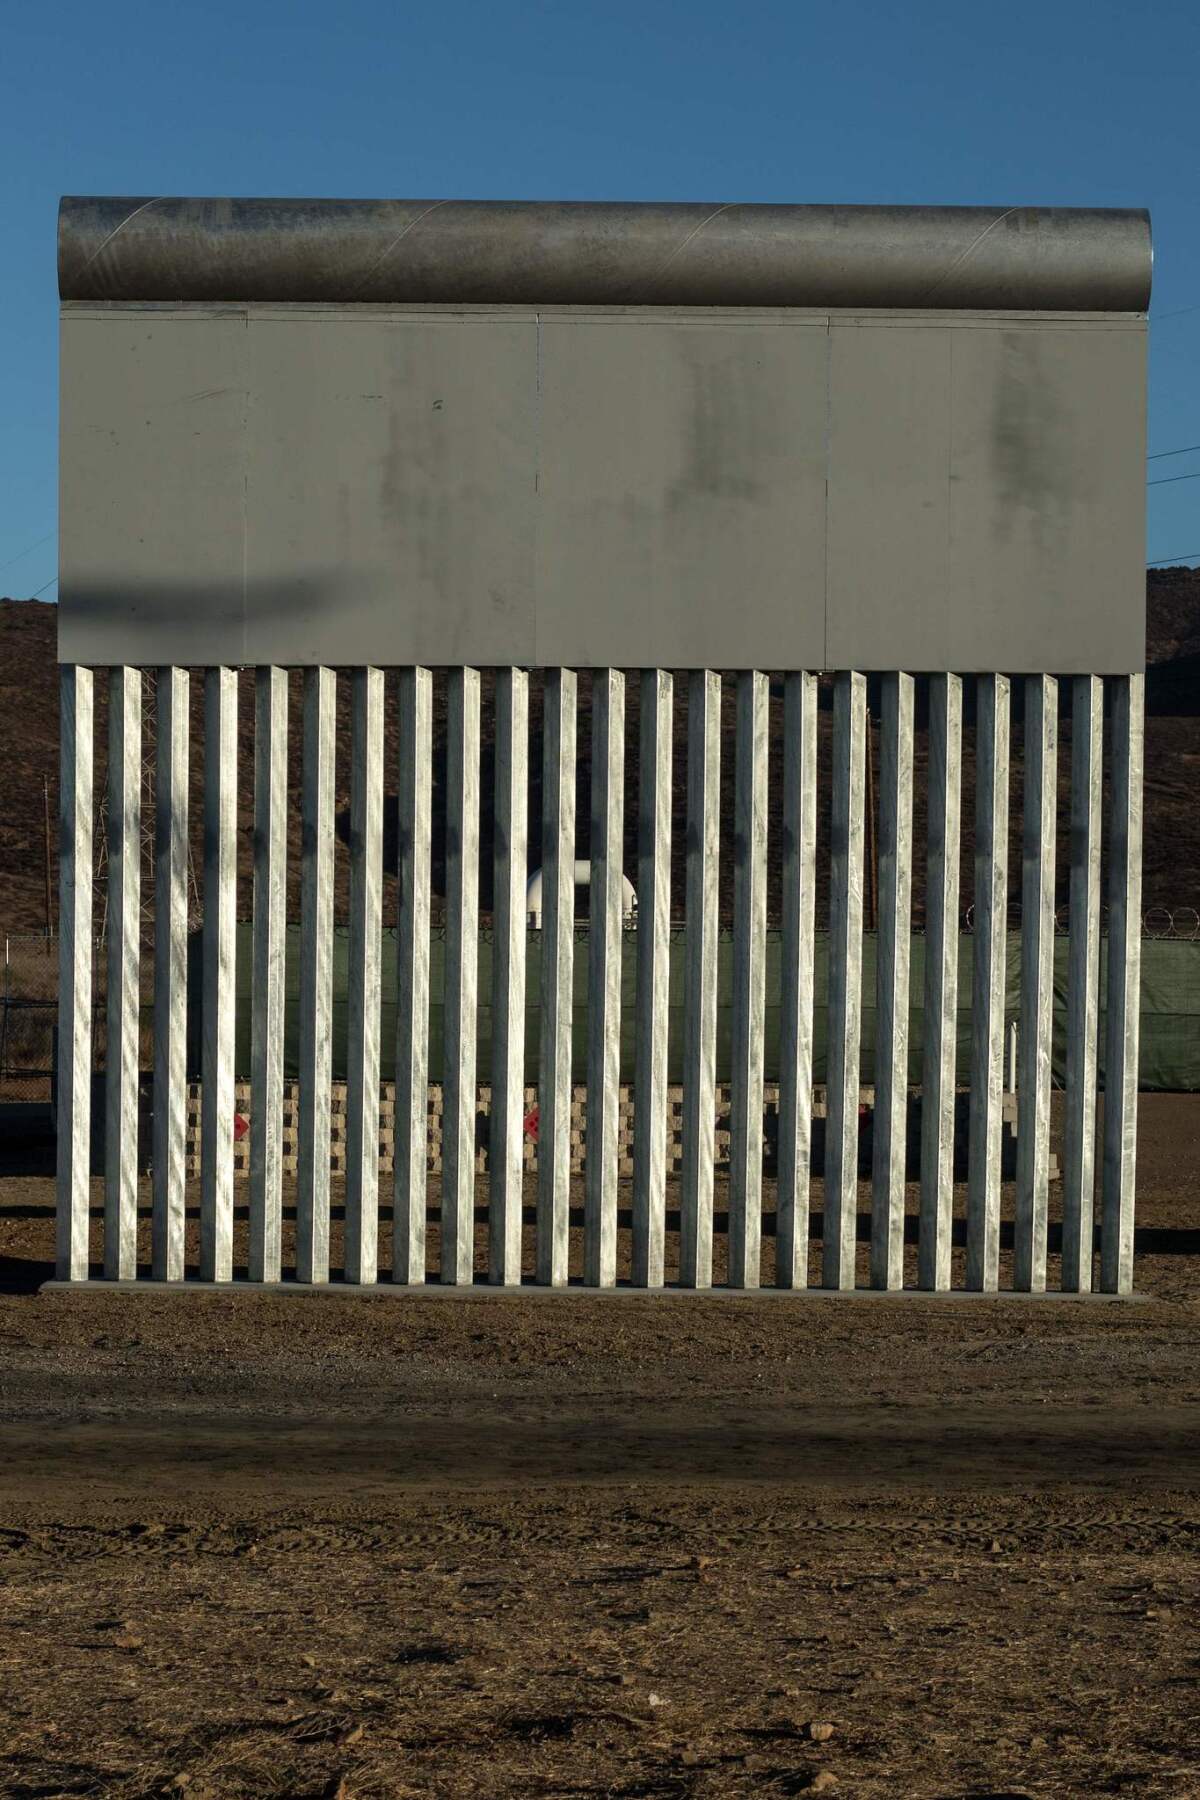 One of the border wall designs with a partially transparent lower portion.